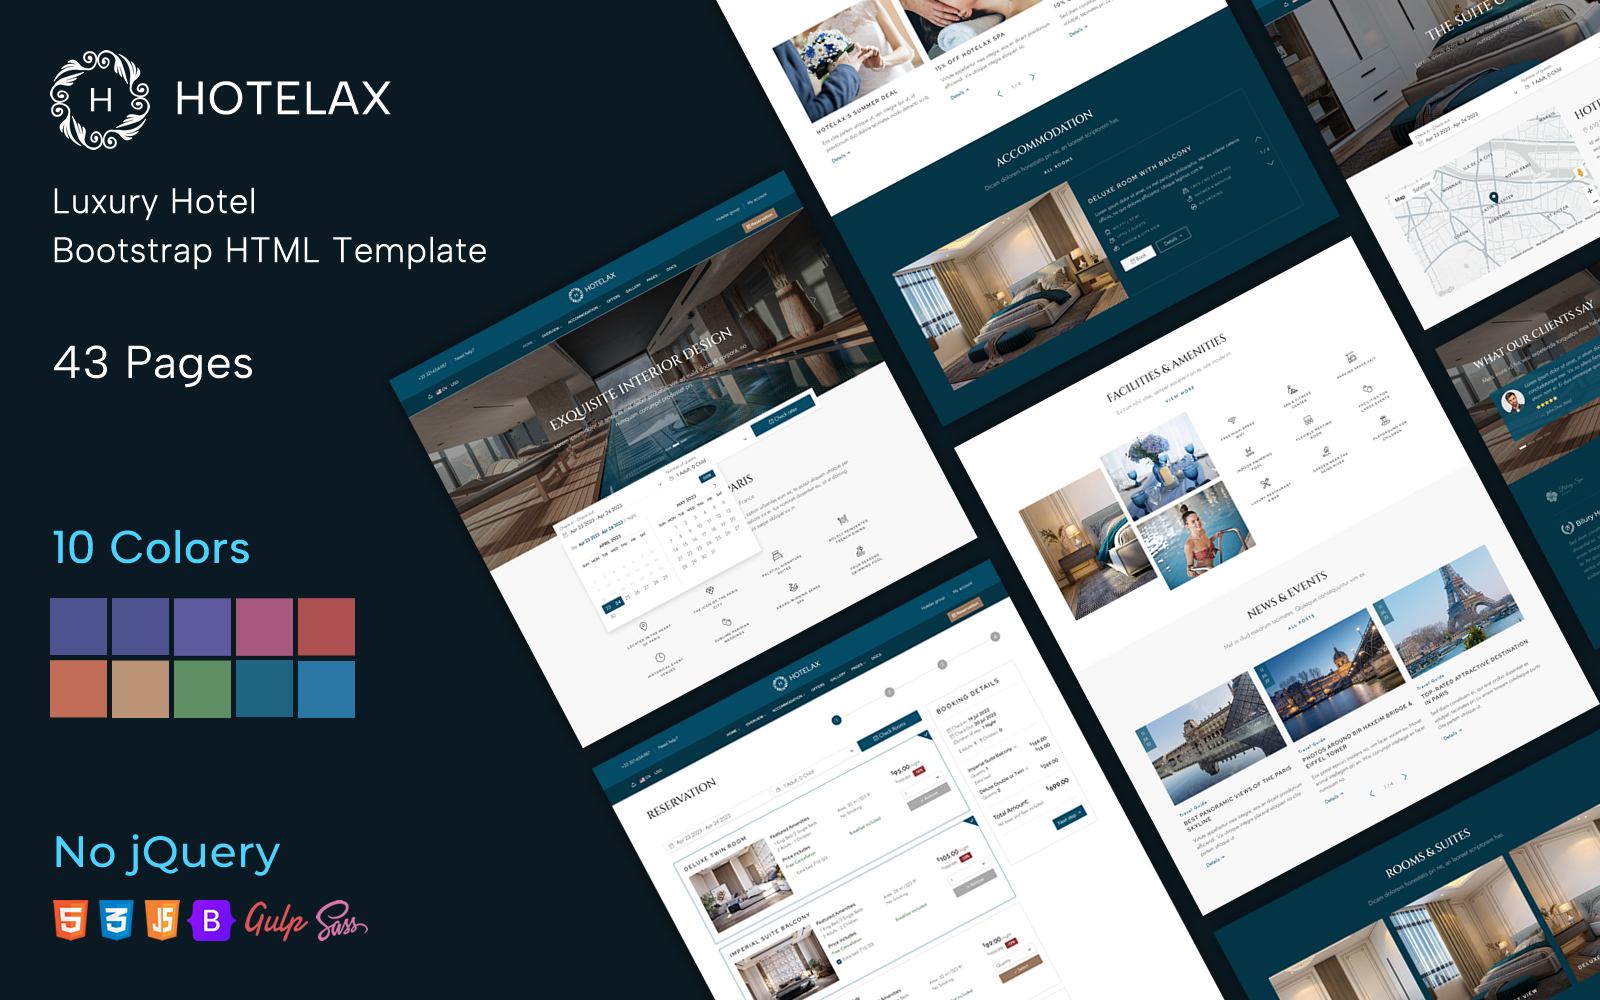 Hotelax - Luxury Hotel Bootstrap HTML Template